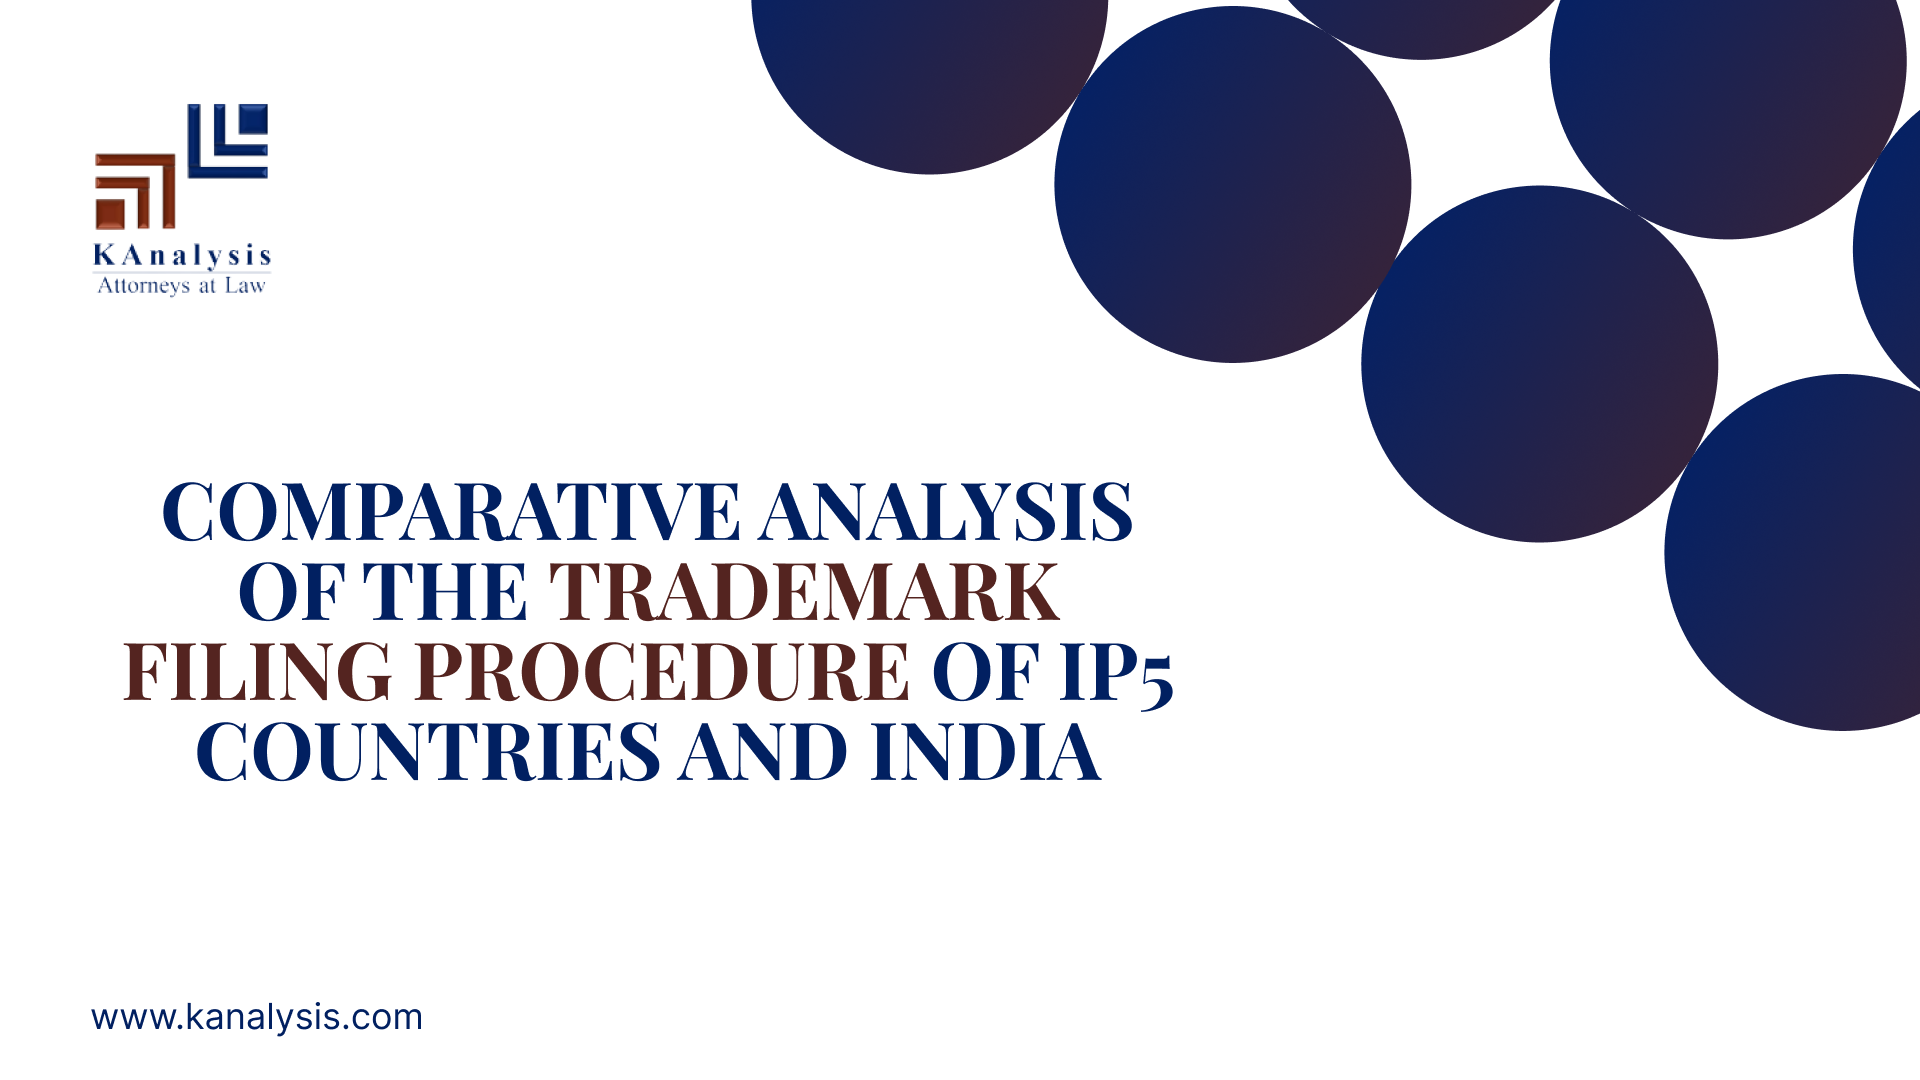 COMPARATIVE ANALYSIS OF THE TRADEMARK FILING PROCEDURE OF IP5 COUNTRIES AND INDIA